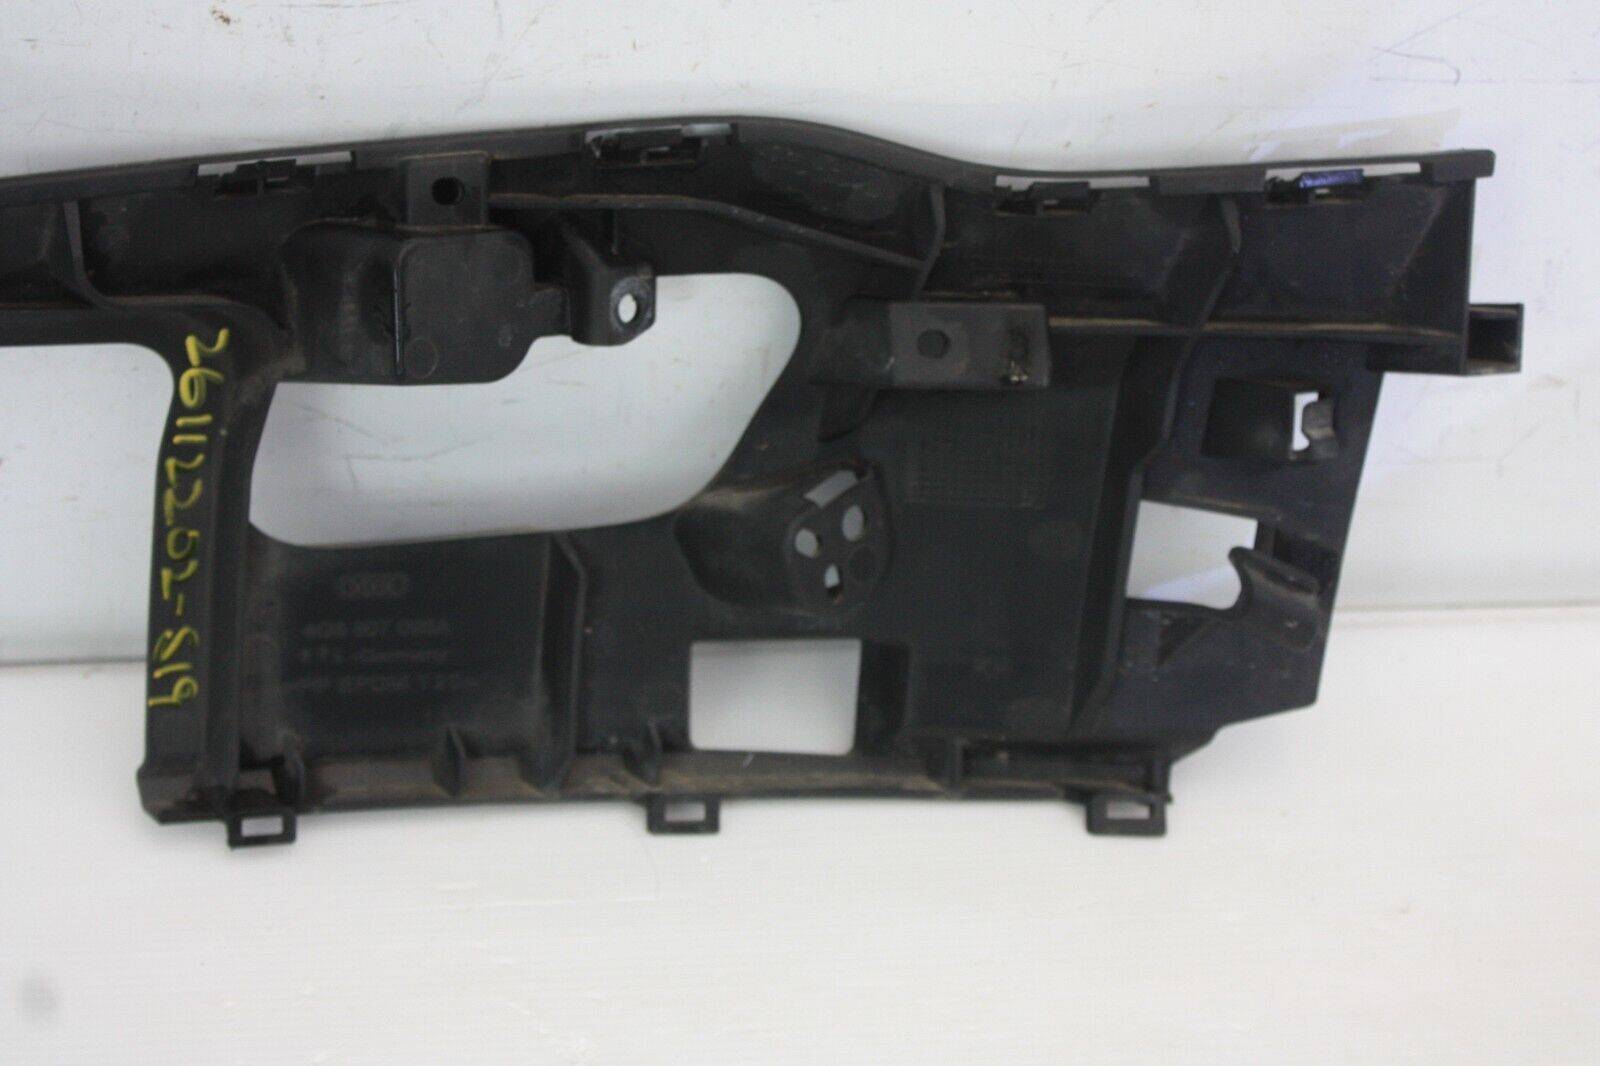 Audi-A7-Front-Bumper-Right-Bracket-2011-TO-2014-4G8807096A-Genuine-175507809756-9